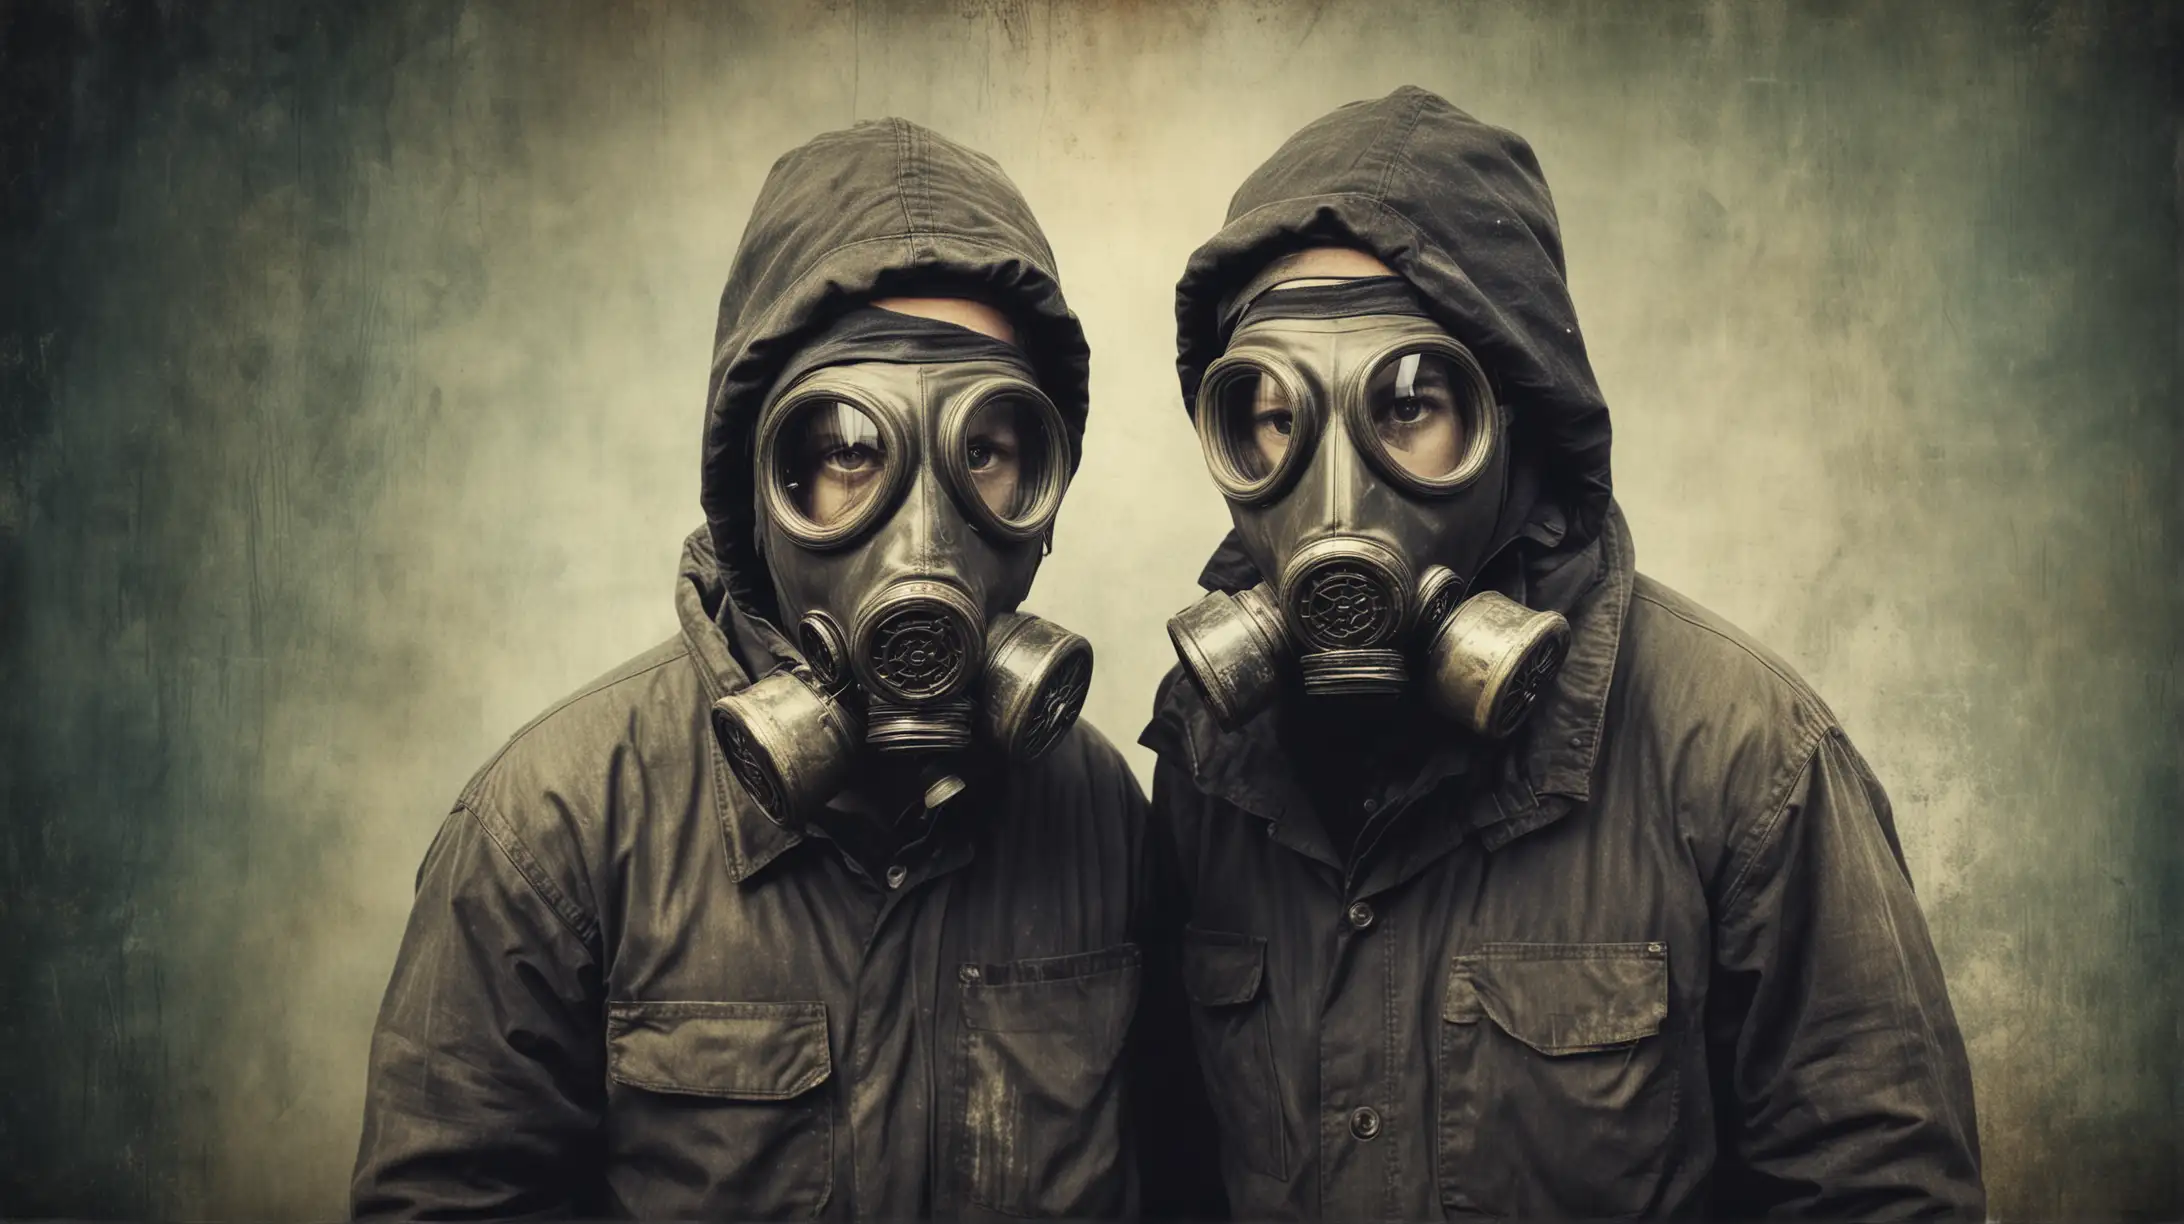 Grunge Workers with Gas Masks